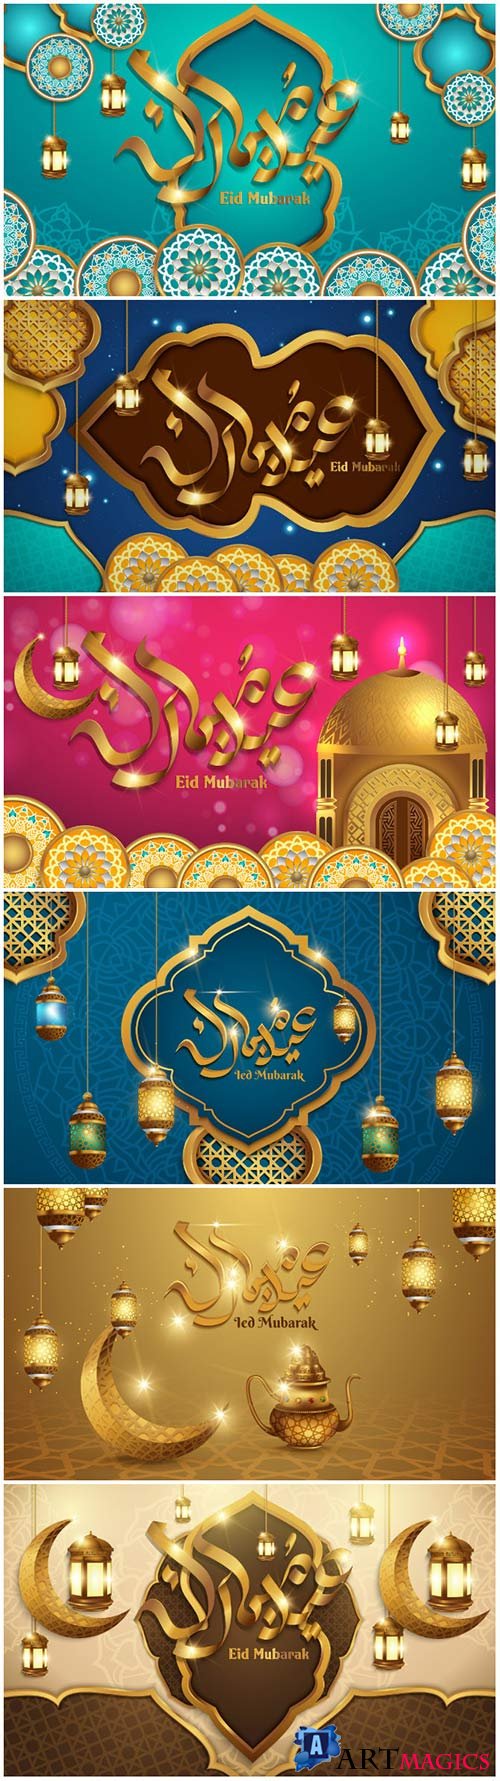 Ramadan Kareem vector calligraphy design with decorative floral pattern, mosque silhouette, crescent and glittering islamic background # 57